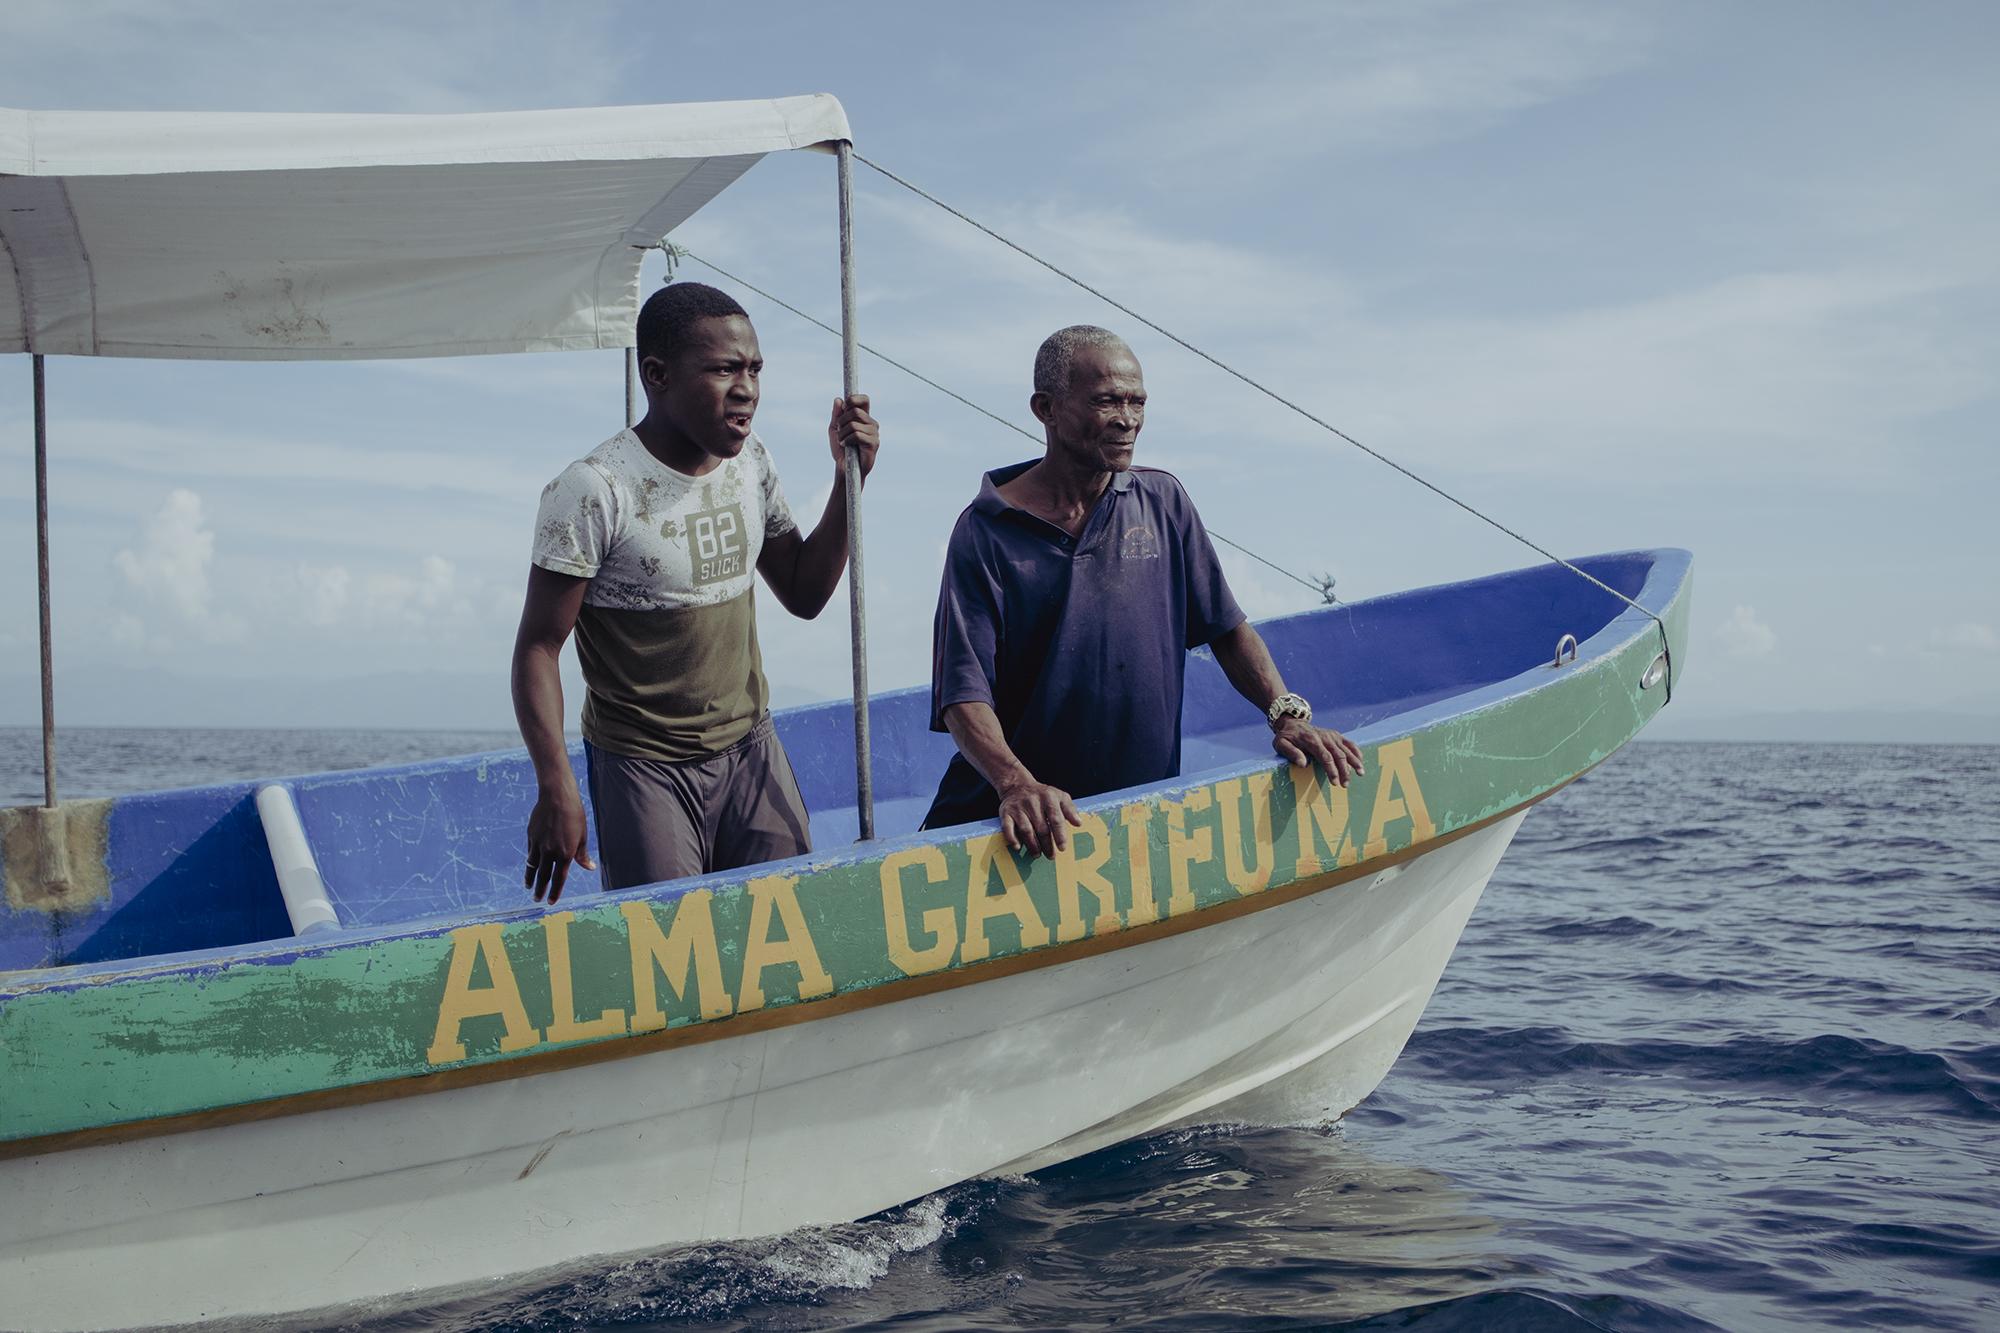 The Garifuna people embrace their history of resilience and strive to adhere to the principles of love for the land and respect for life. “We have a spirit of liberty,” say the land defense committees of the Garifuna nation.